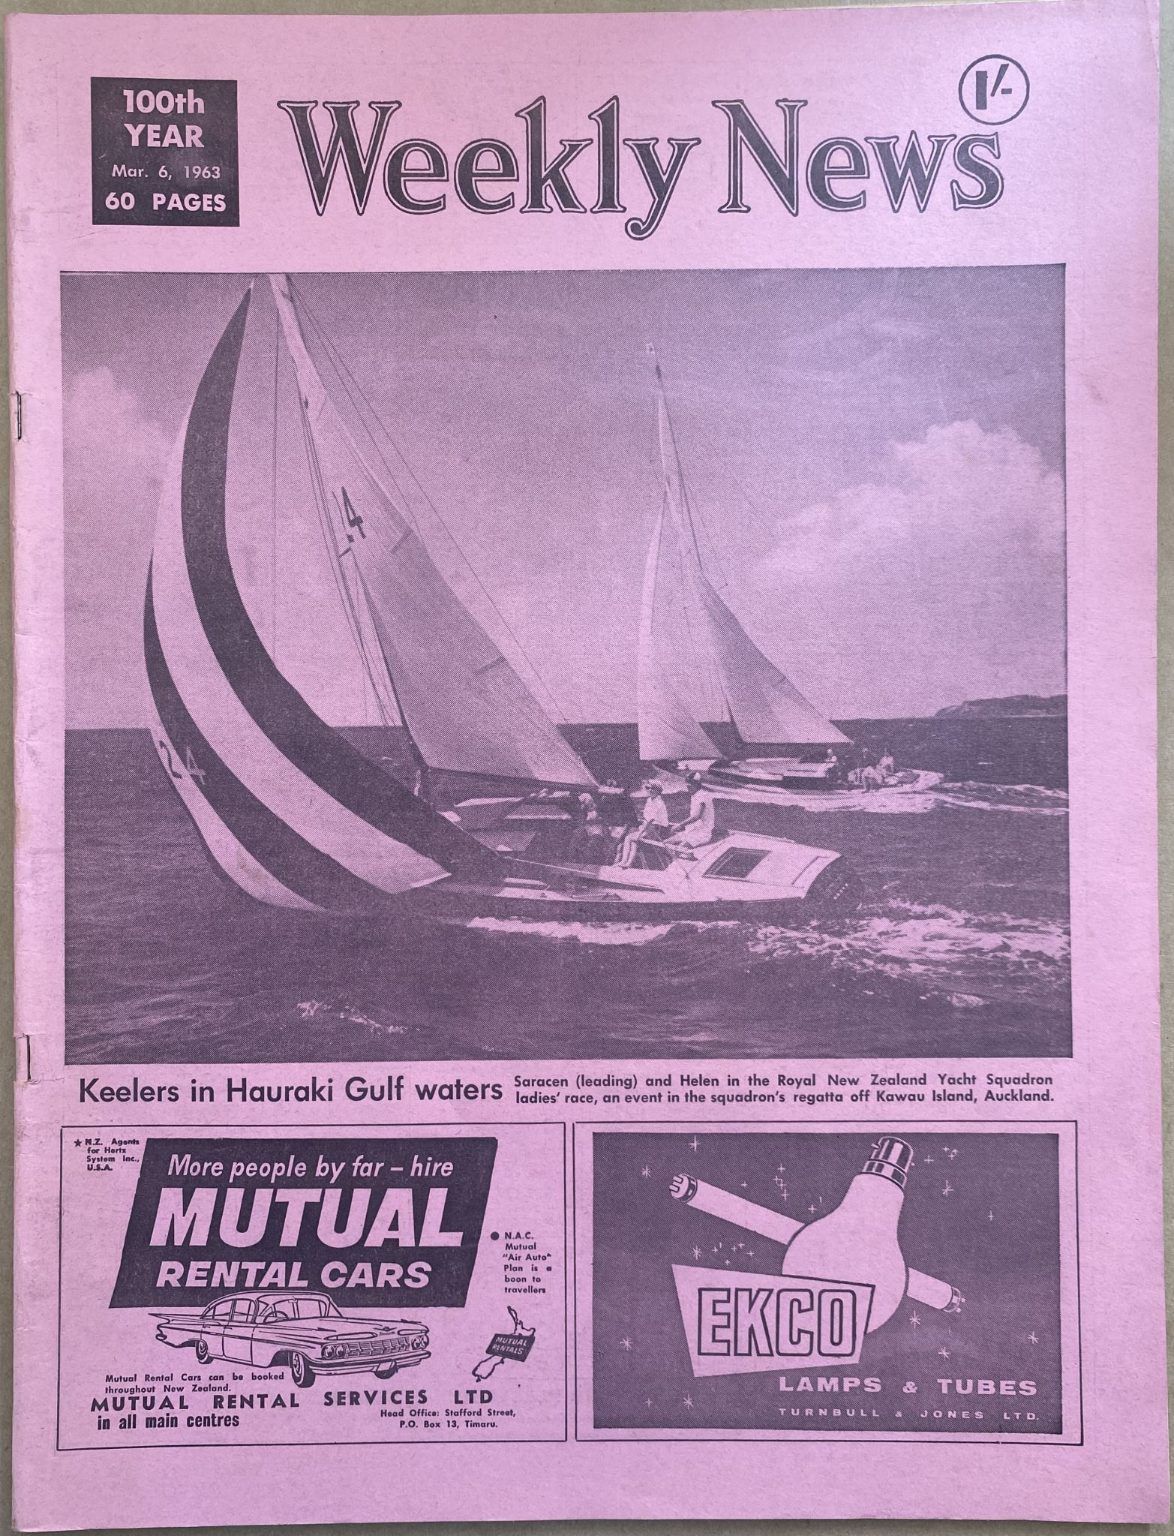 OLD NEWSPAPER: The Weekly News, No. 5180, 6 March 1963